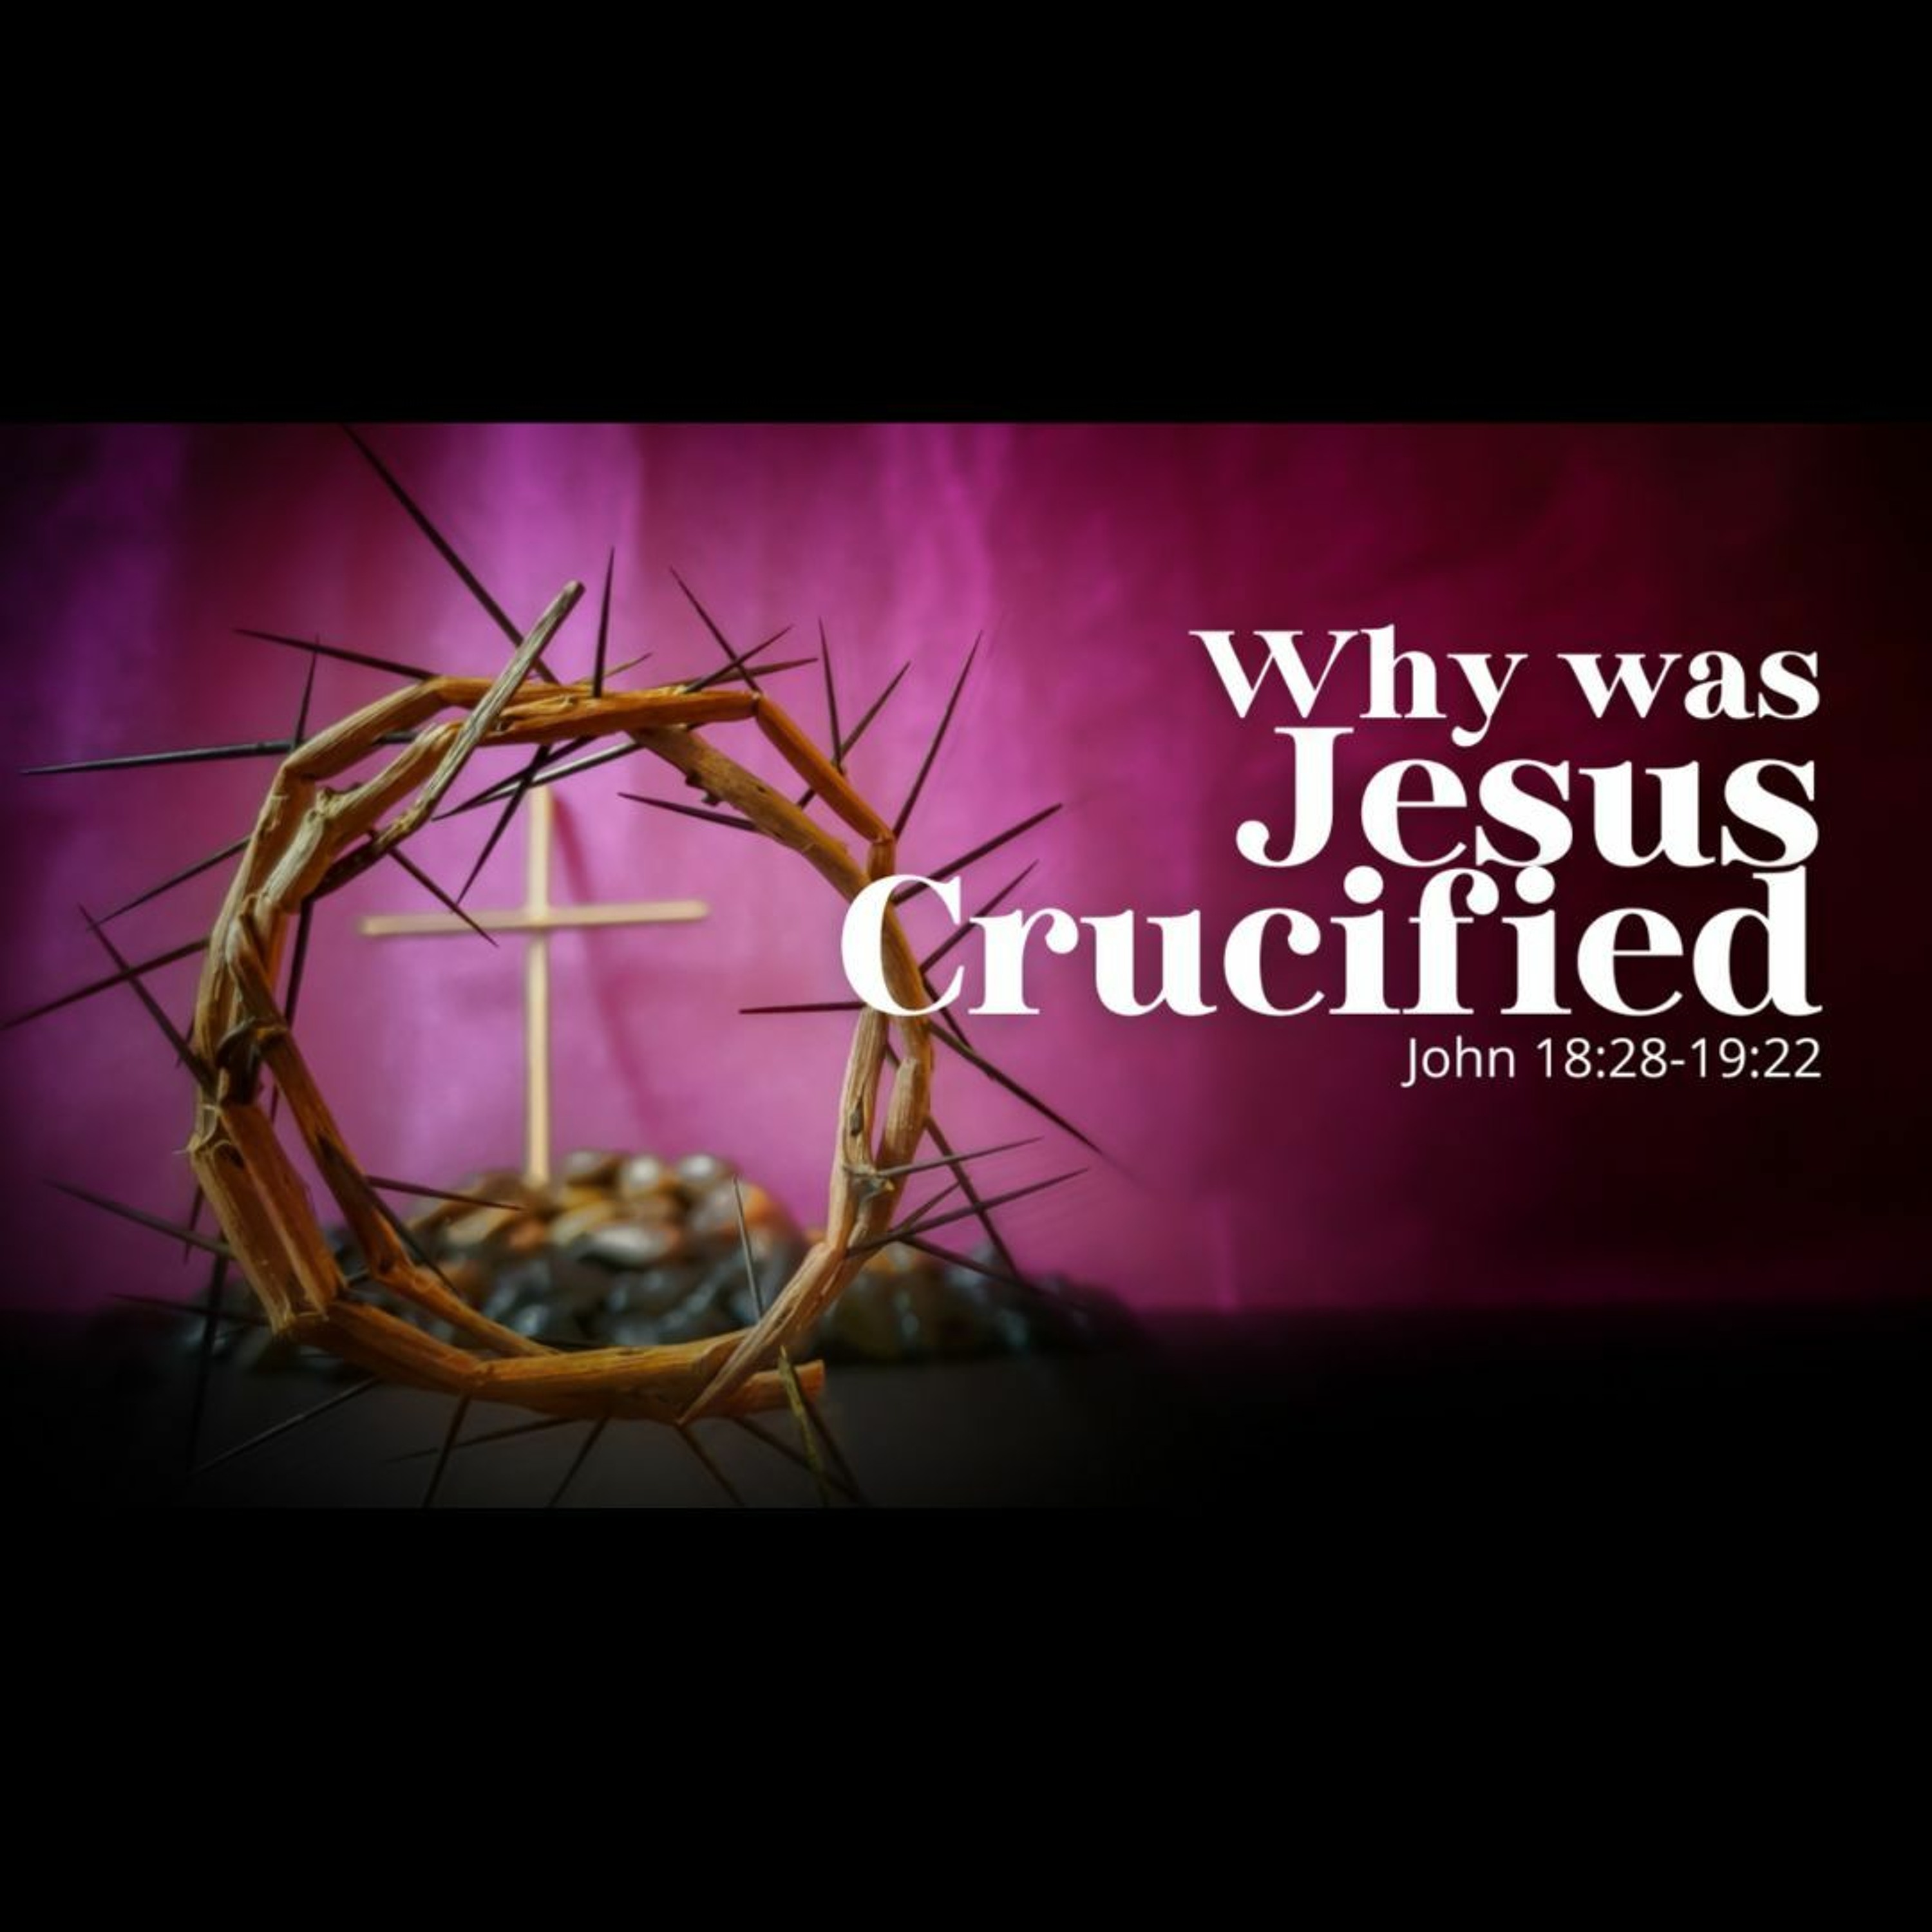 Why was Jesus Crucified (John 18:28-19:22)